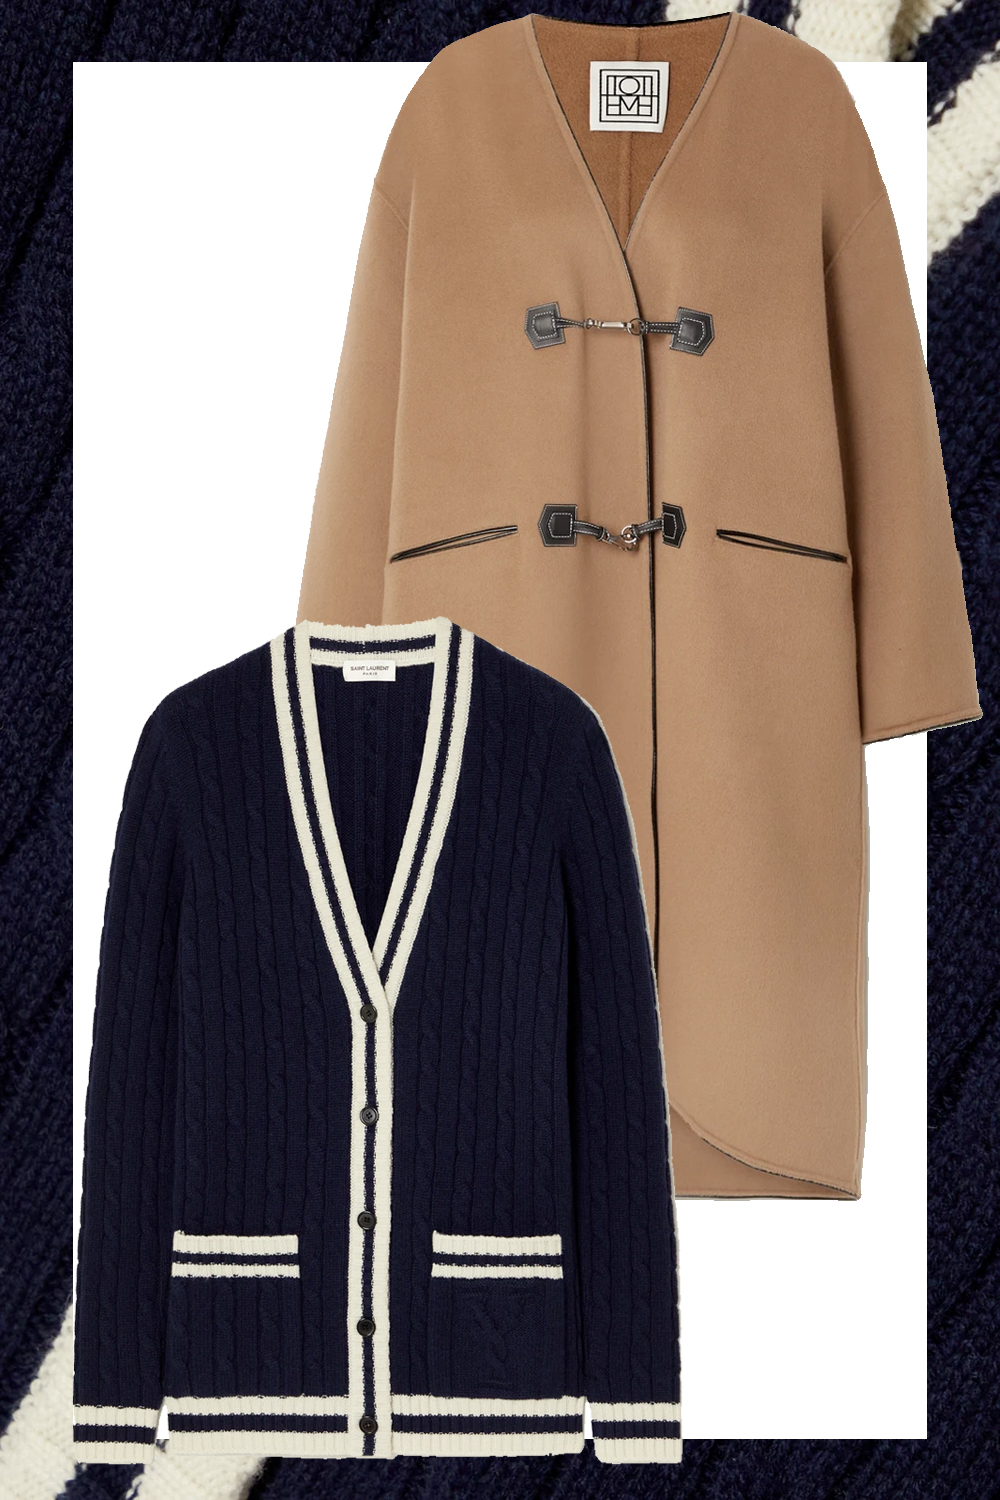 NET-A-PORTER coat and jumper pairings